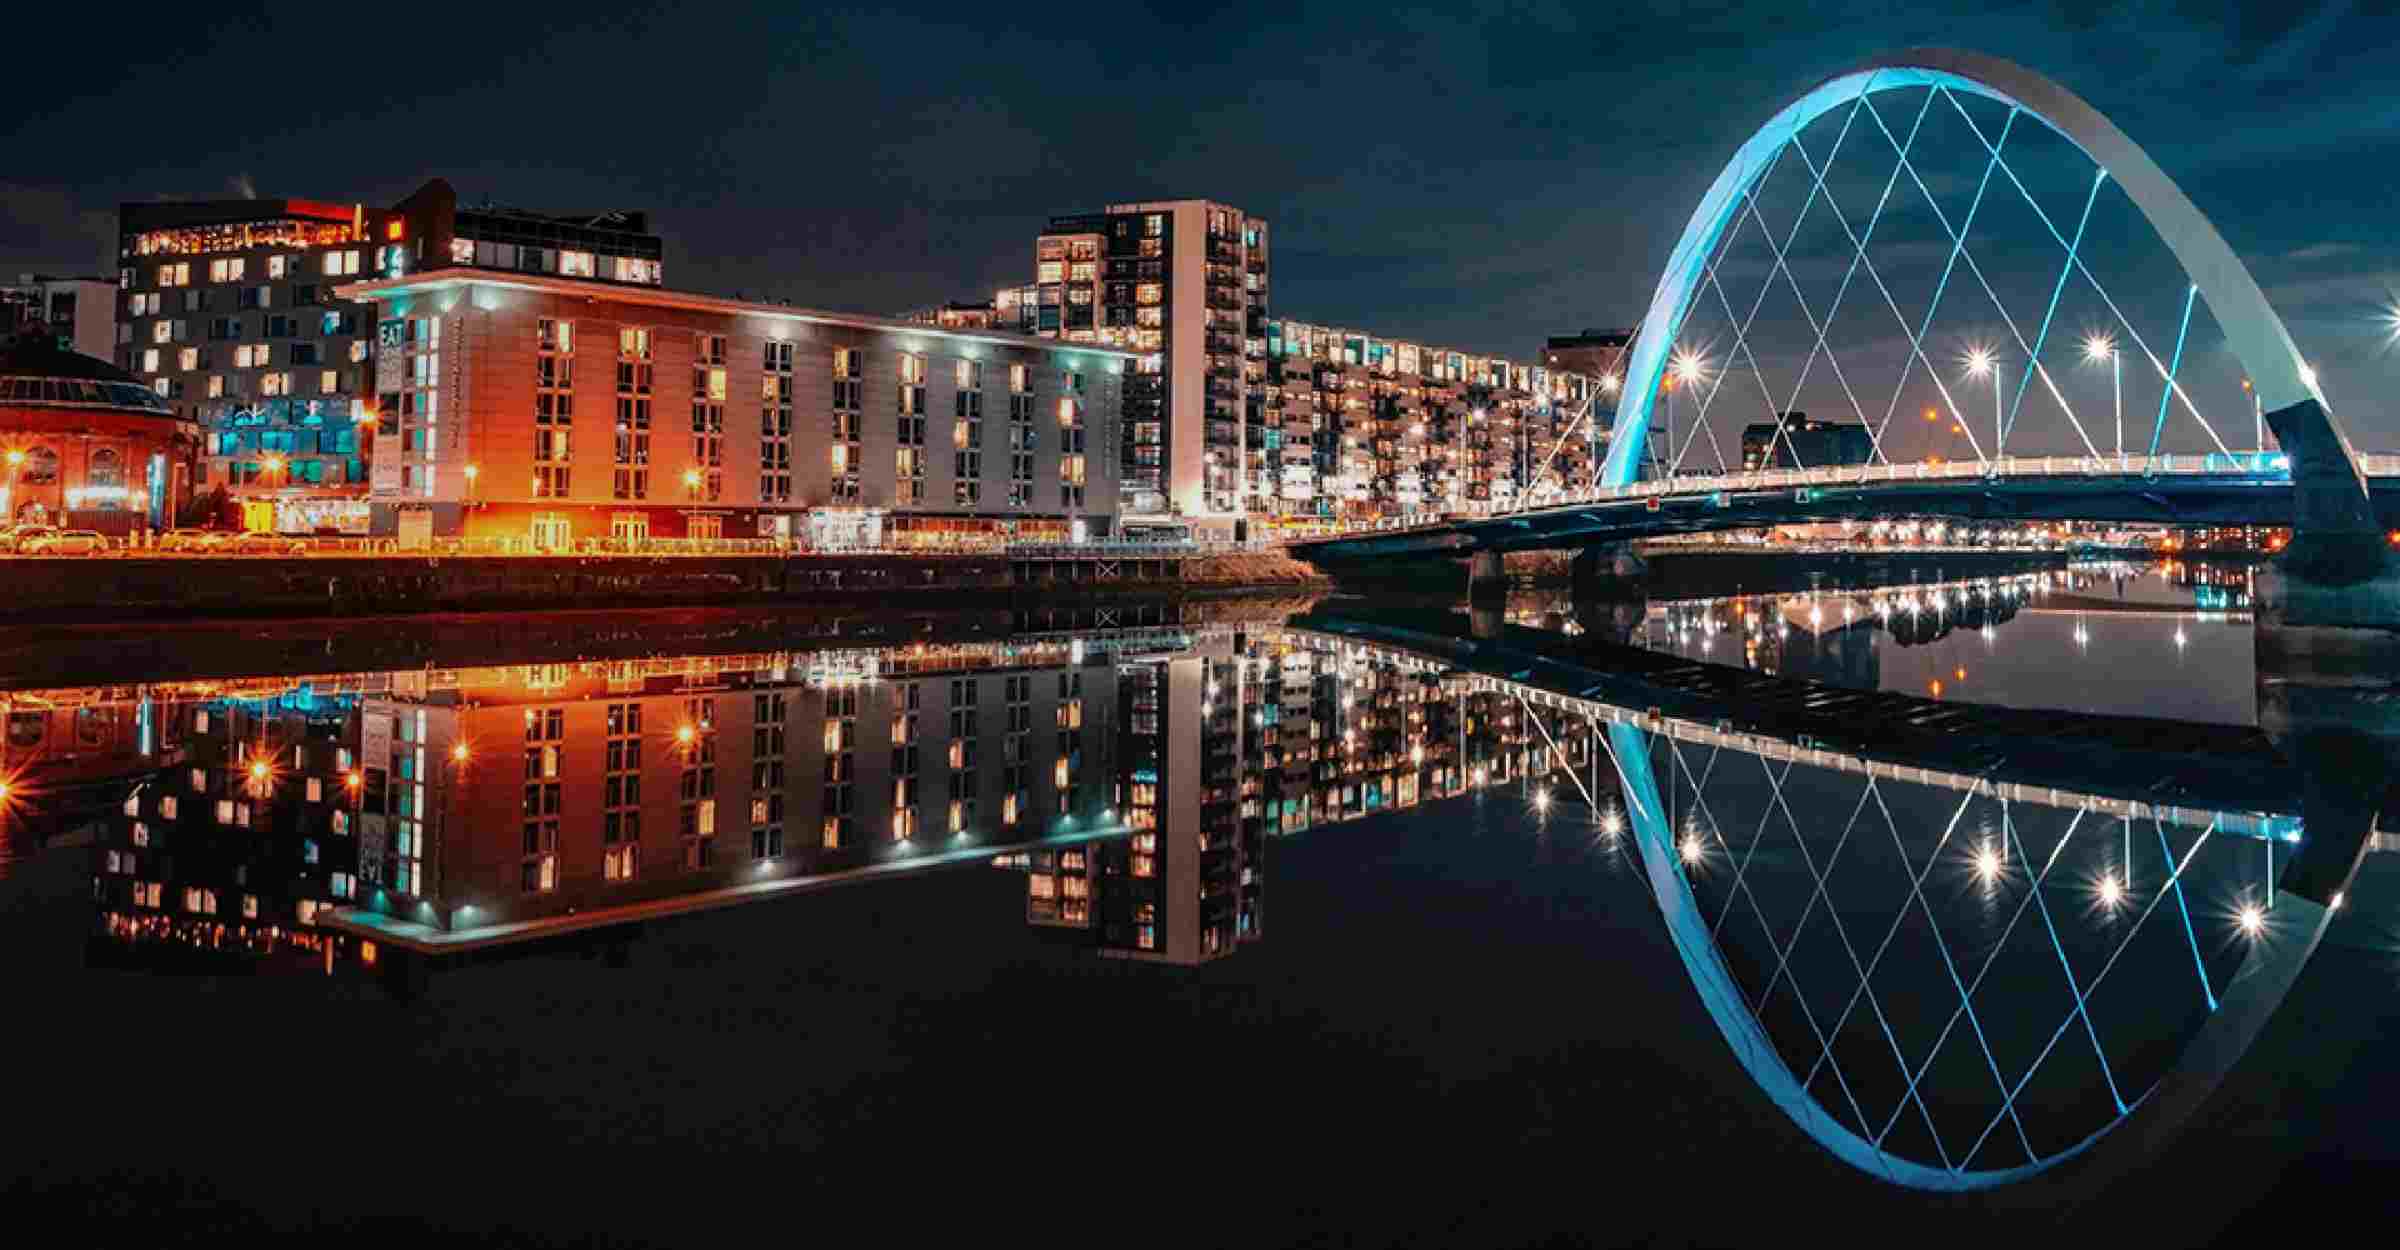 Night view of a bridge and a group of buildings in Scotland